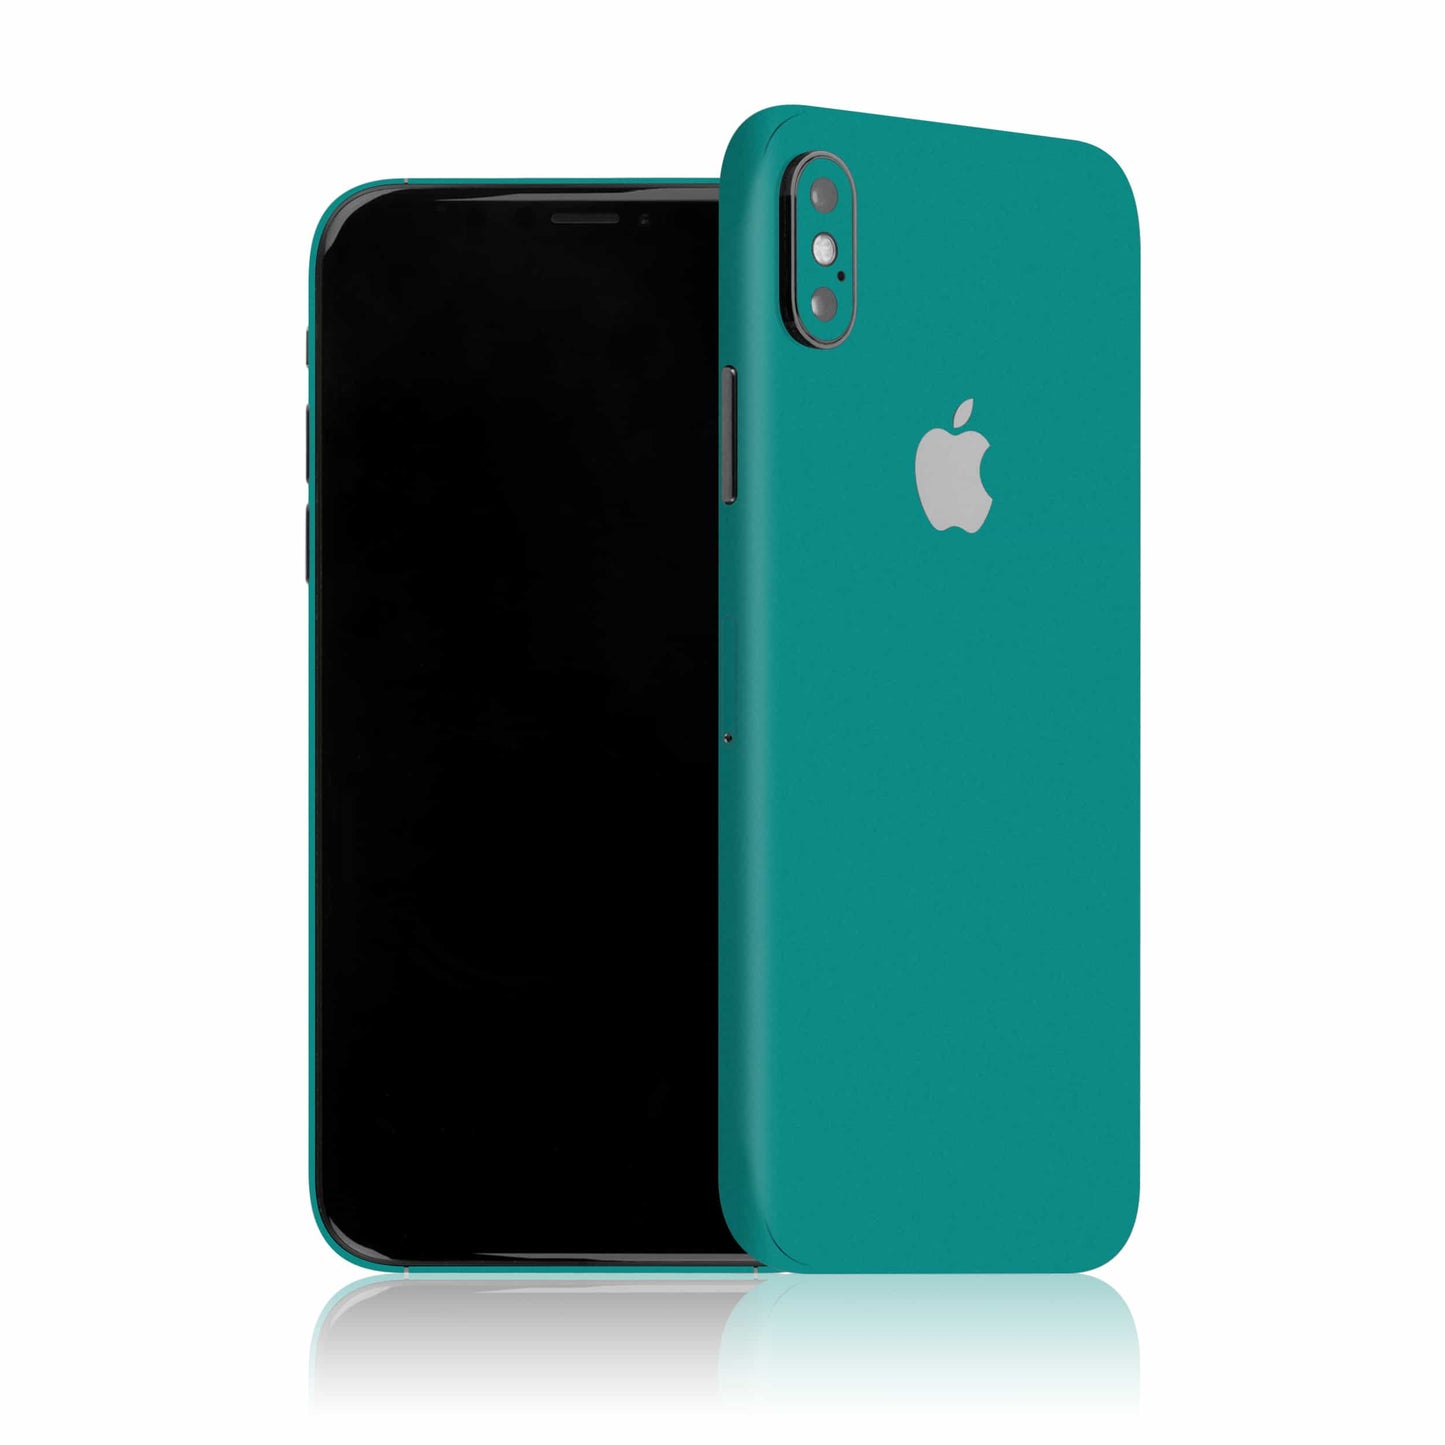 iPhone X - Color Edition